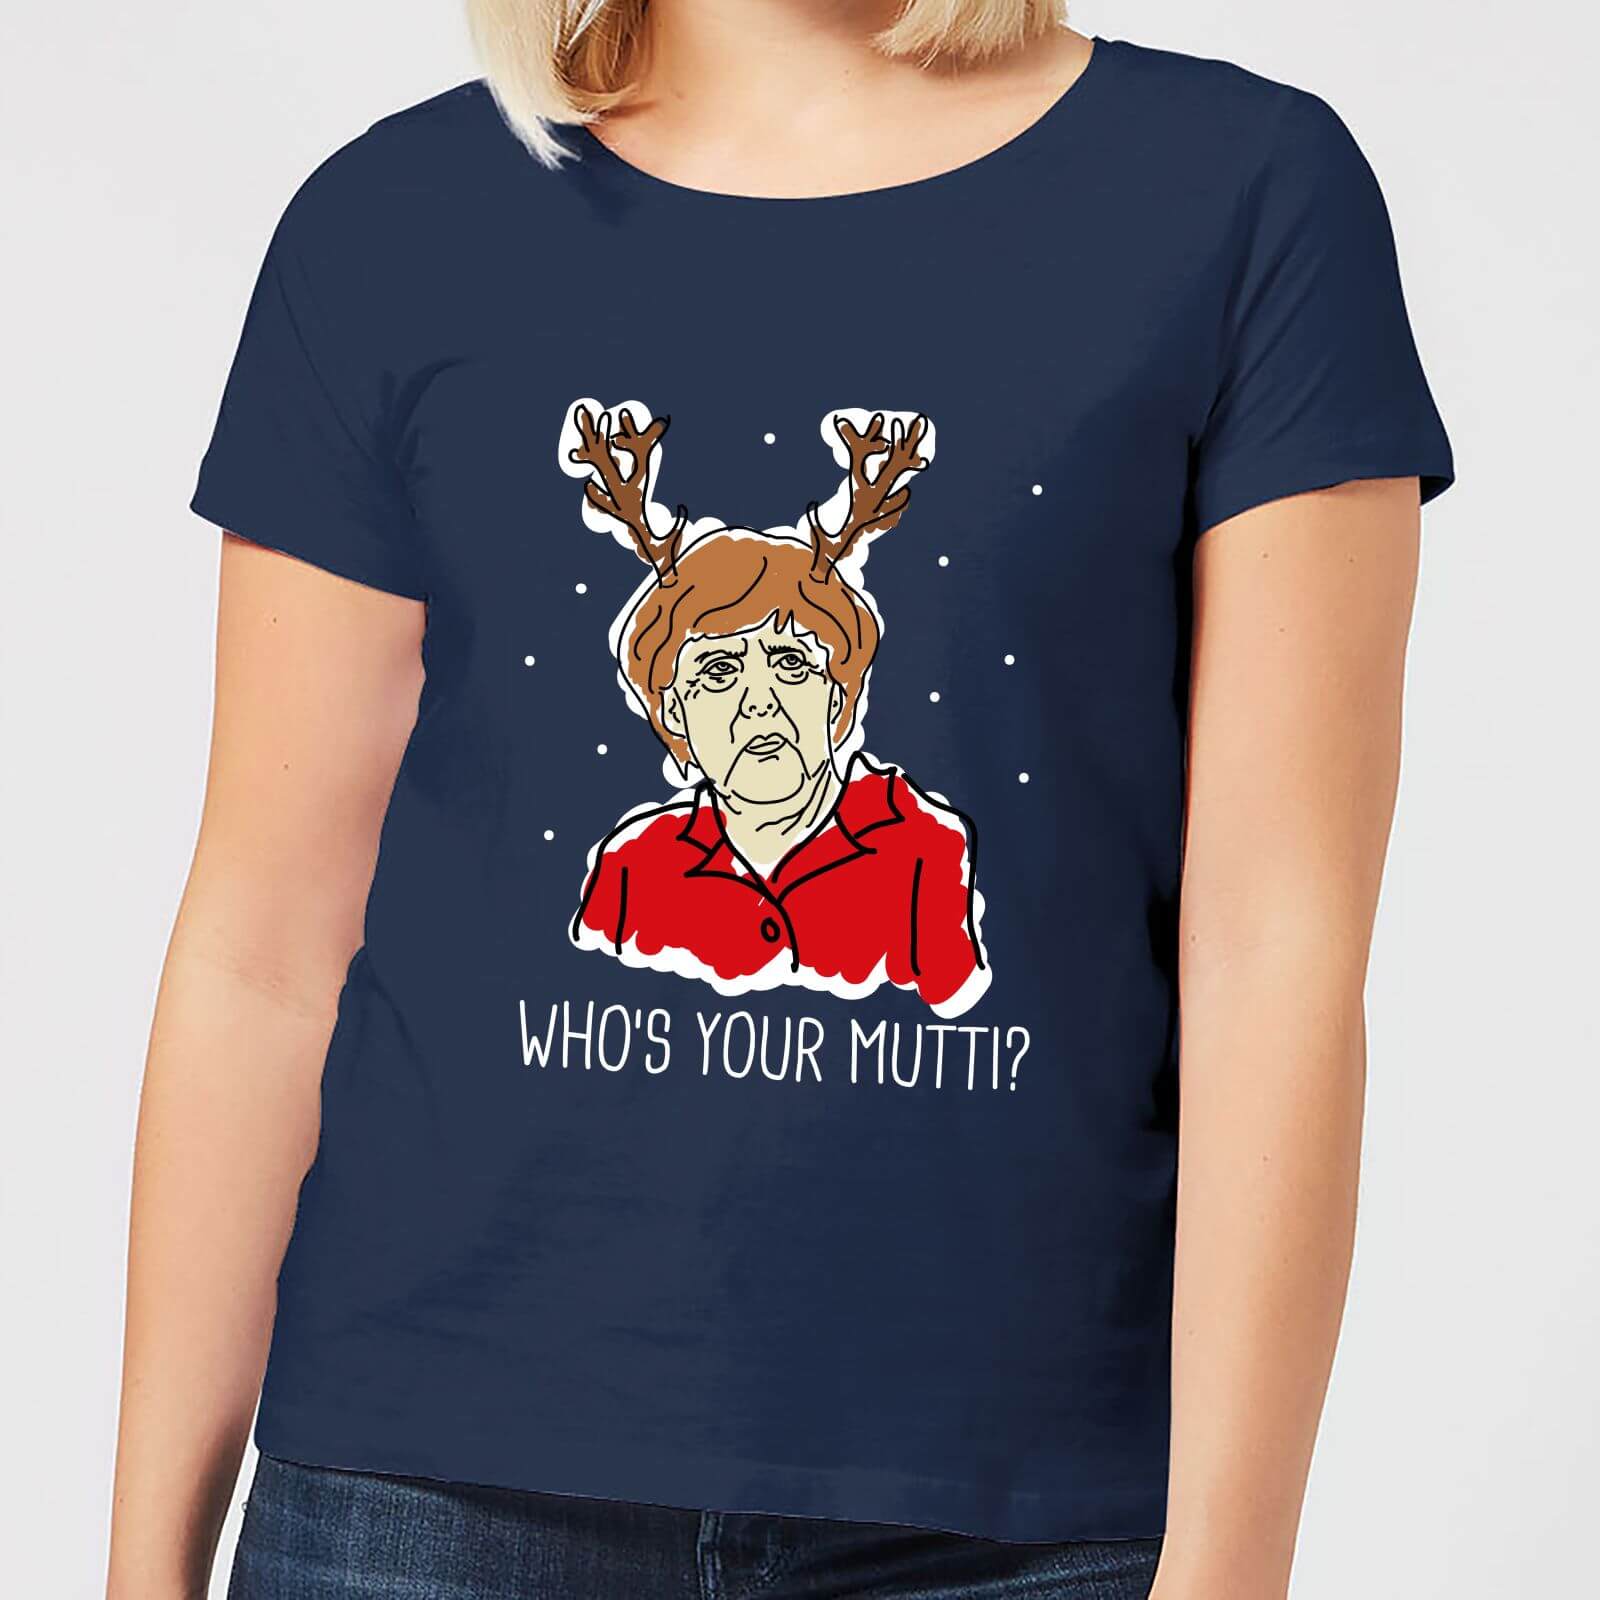 Who's Your Mutti? Women's Christmas T-Shirt - Navy - S - Navy